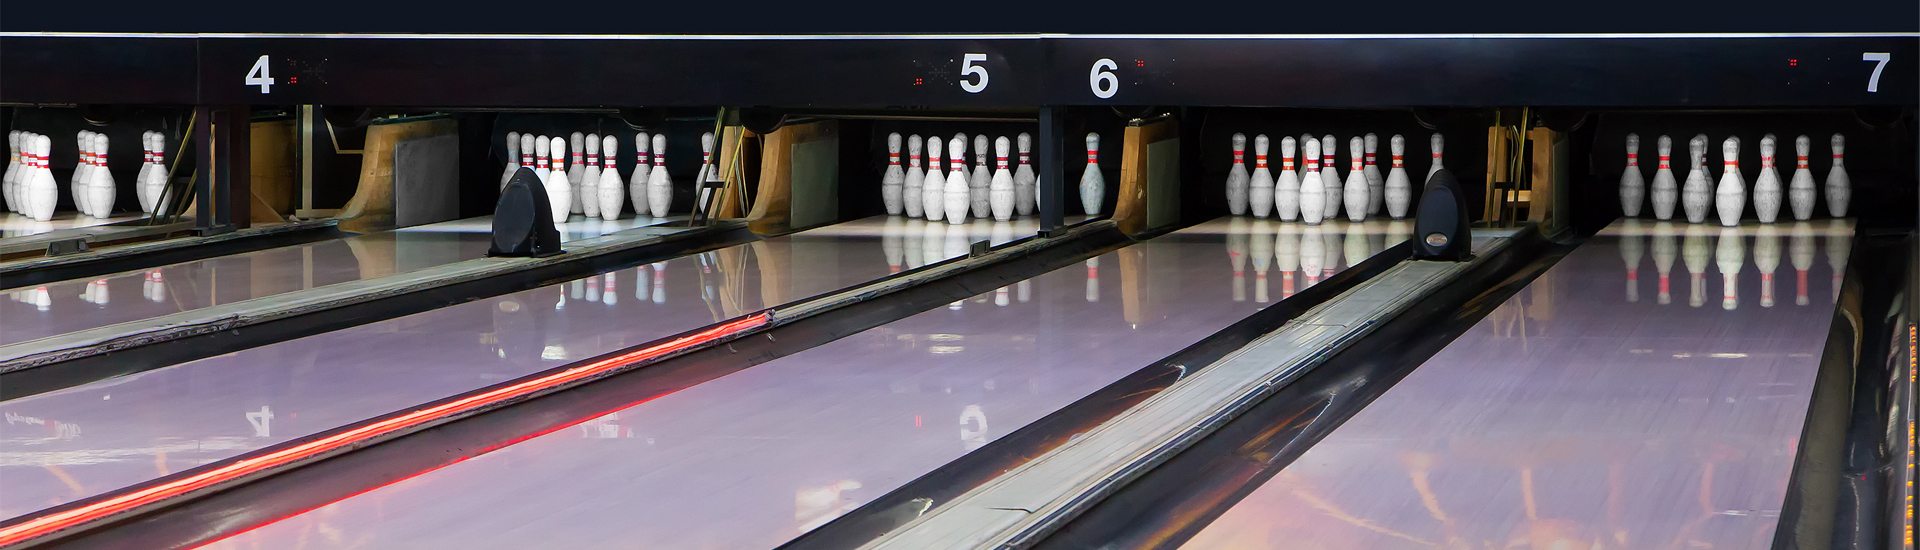 Bowling Alley With Pins